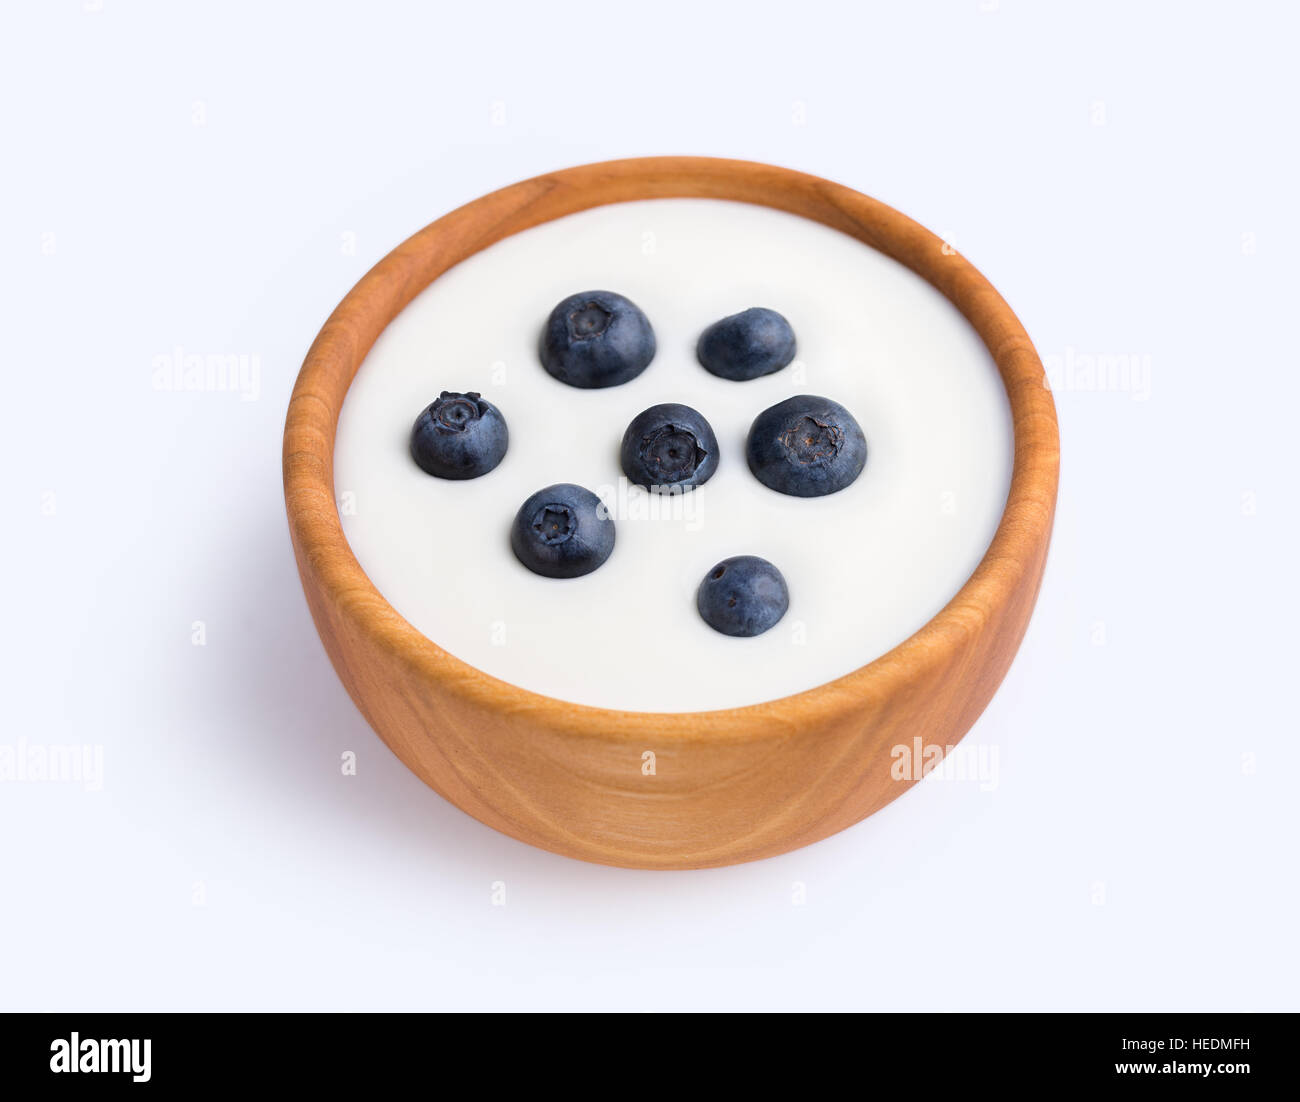 White yogurt in natural wooden bowl with blueberries. Stock Photo